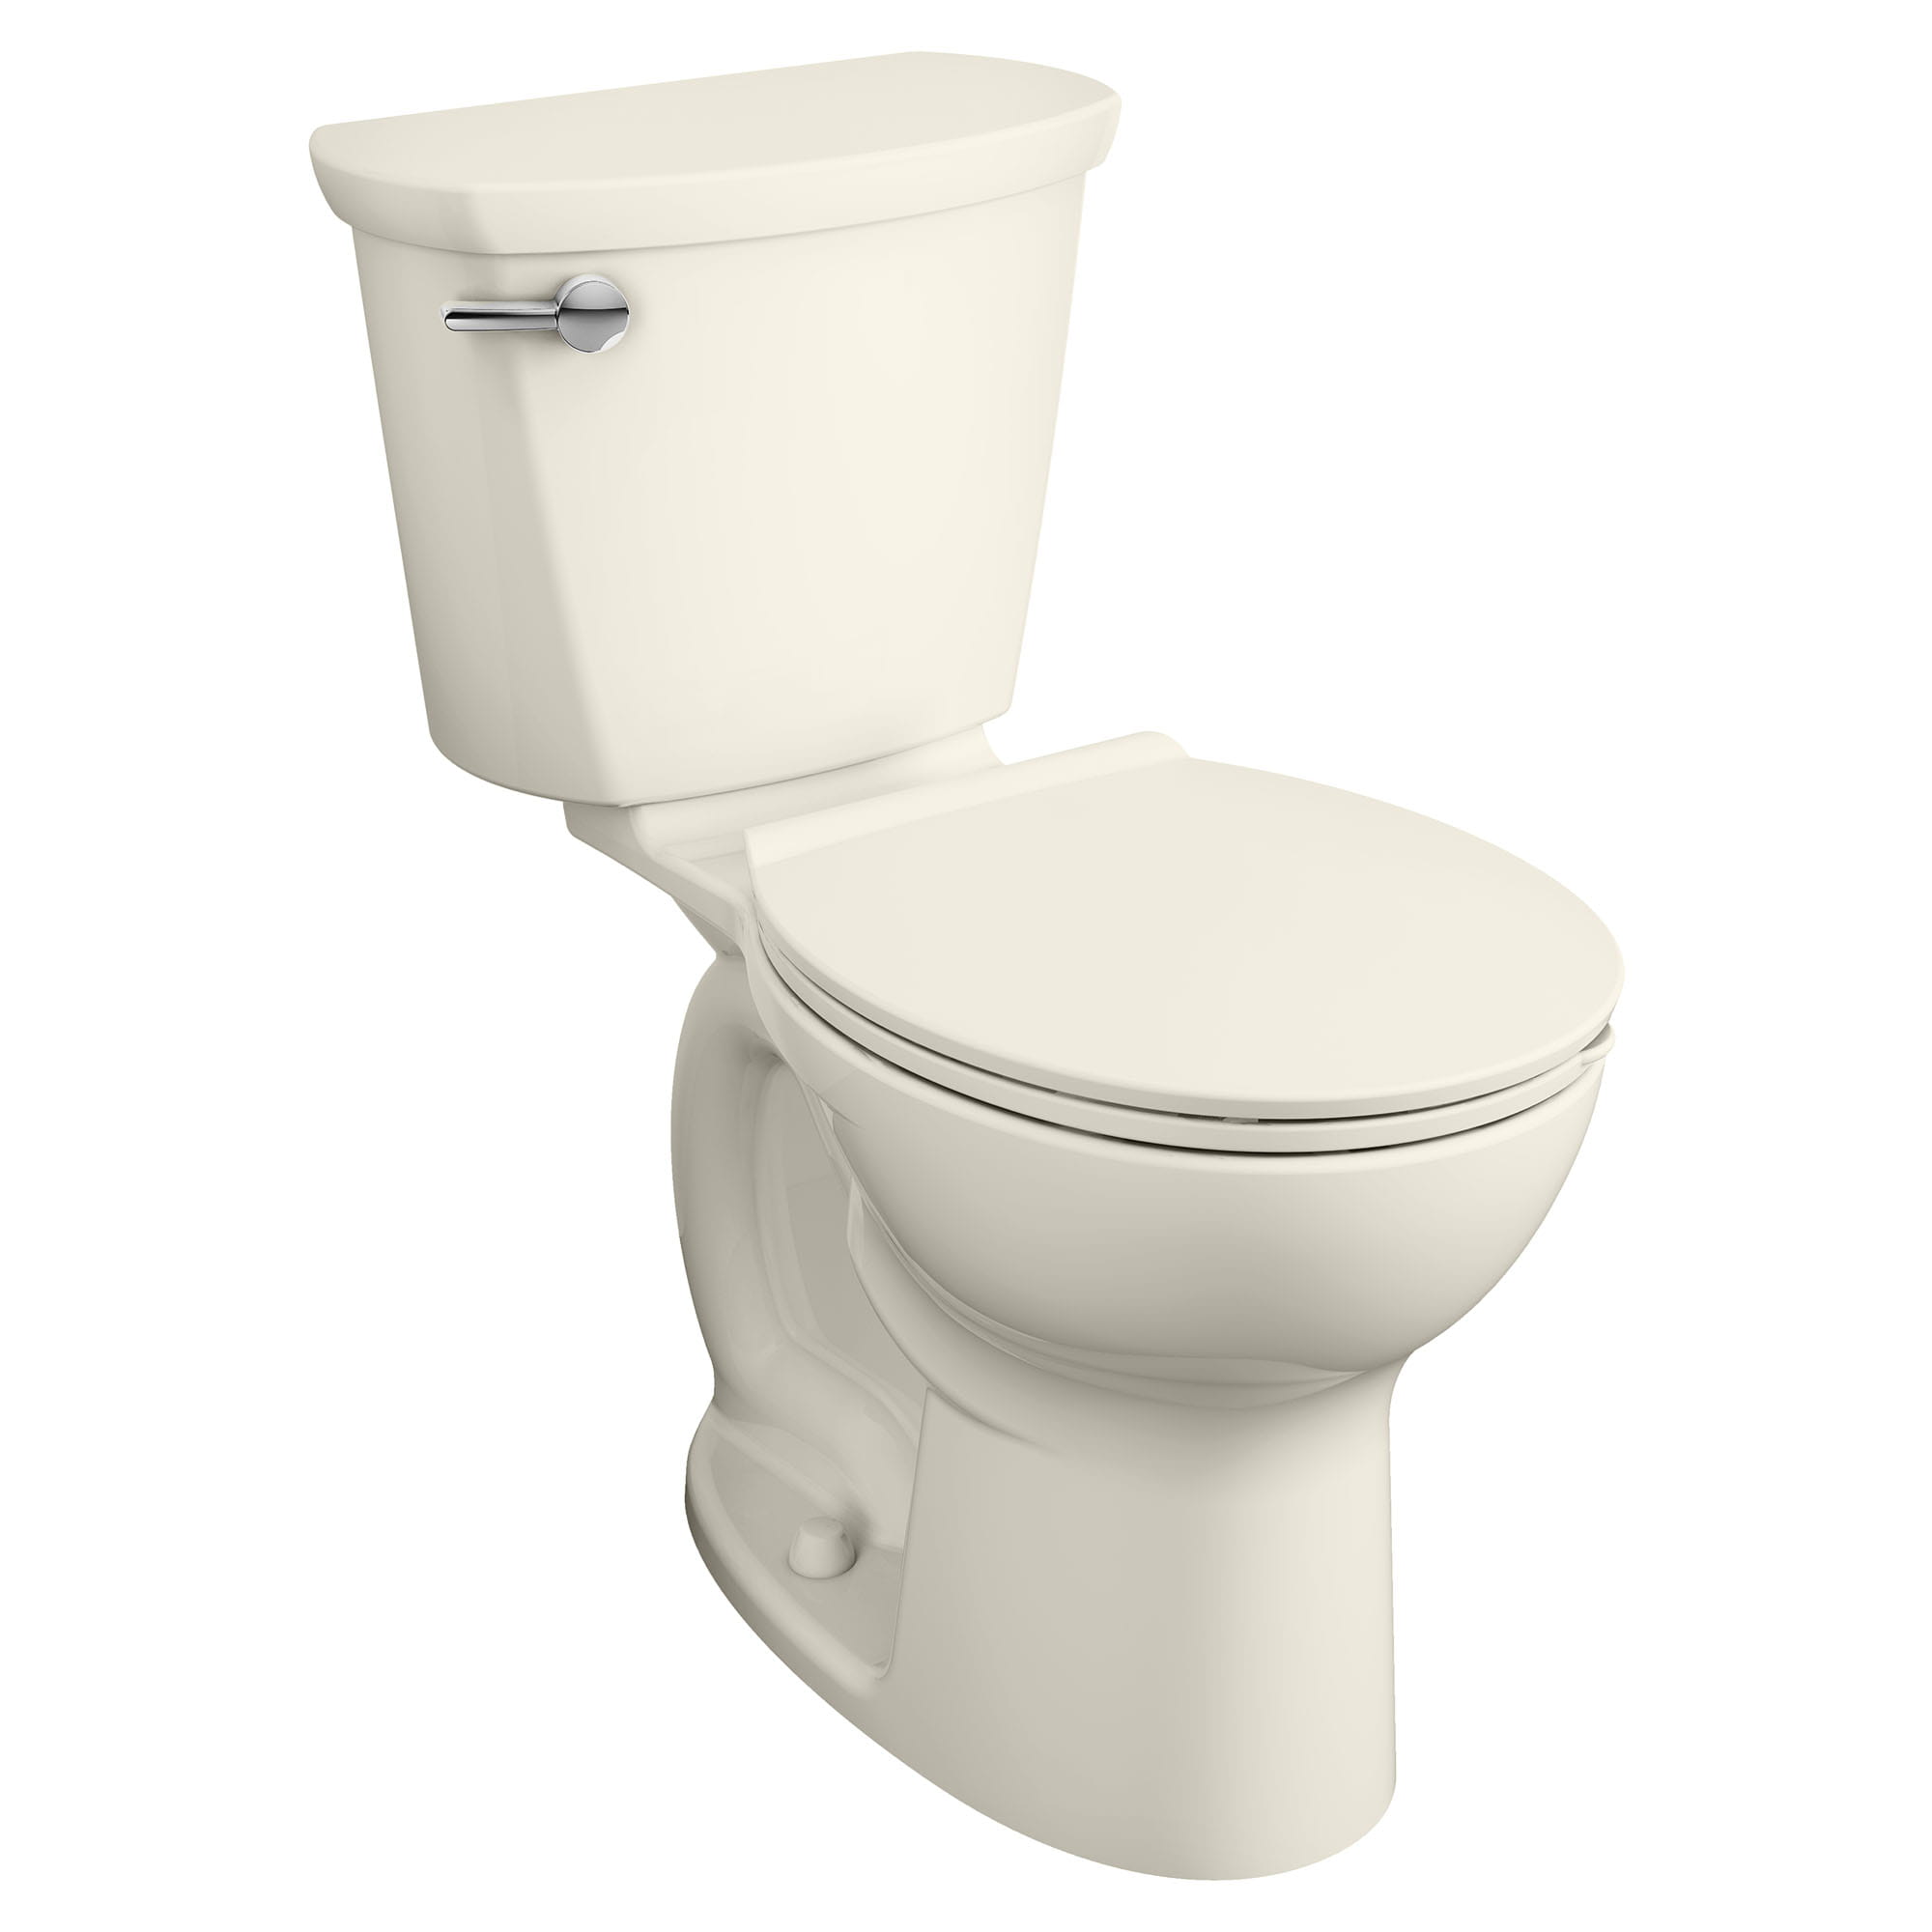 Cadet® PRO Two-Piece 1.28 gpf/4.8 Lpf Chair Height Round Front Toilet Less Seat